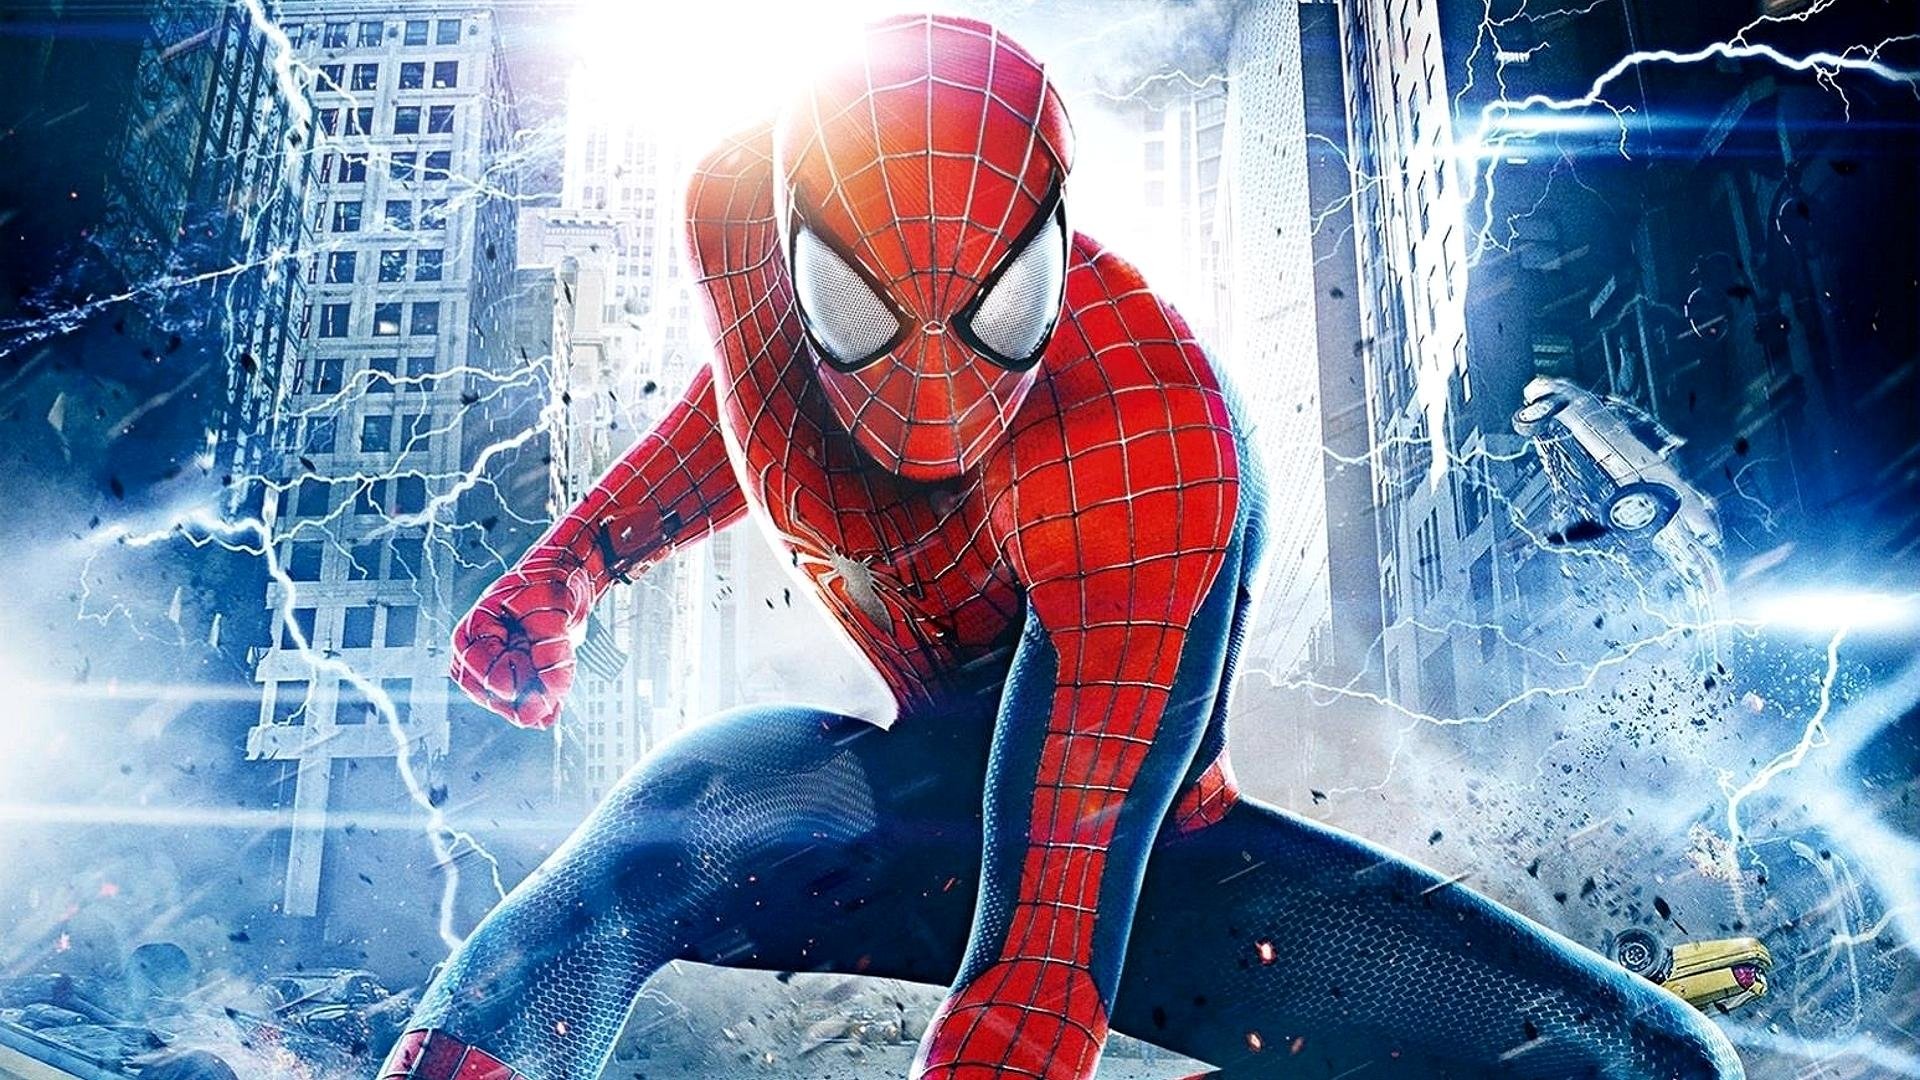 Andrew Garfield Responds To Spider Man: No Way Home Rumors Got This Covered